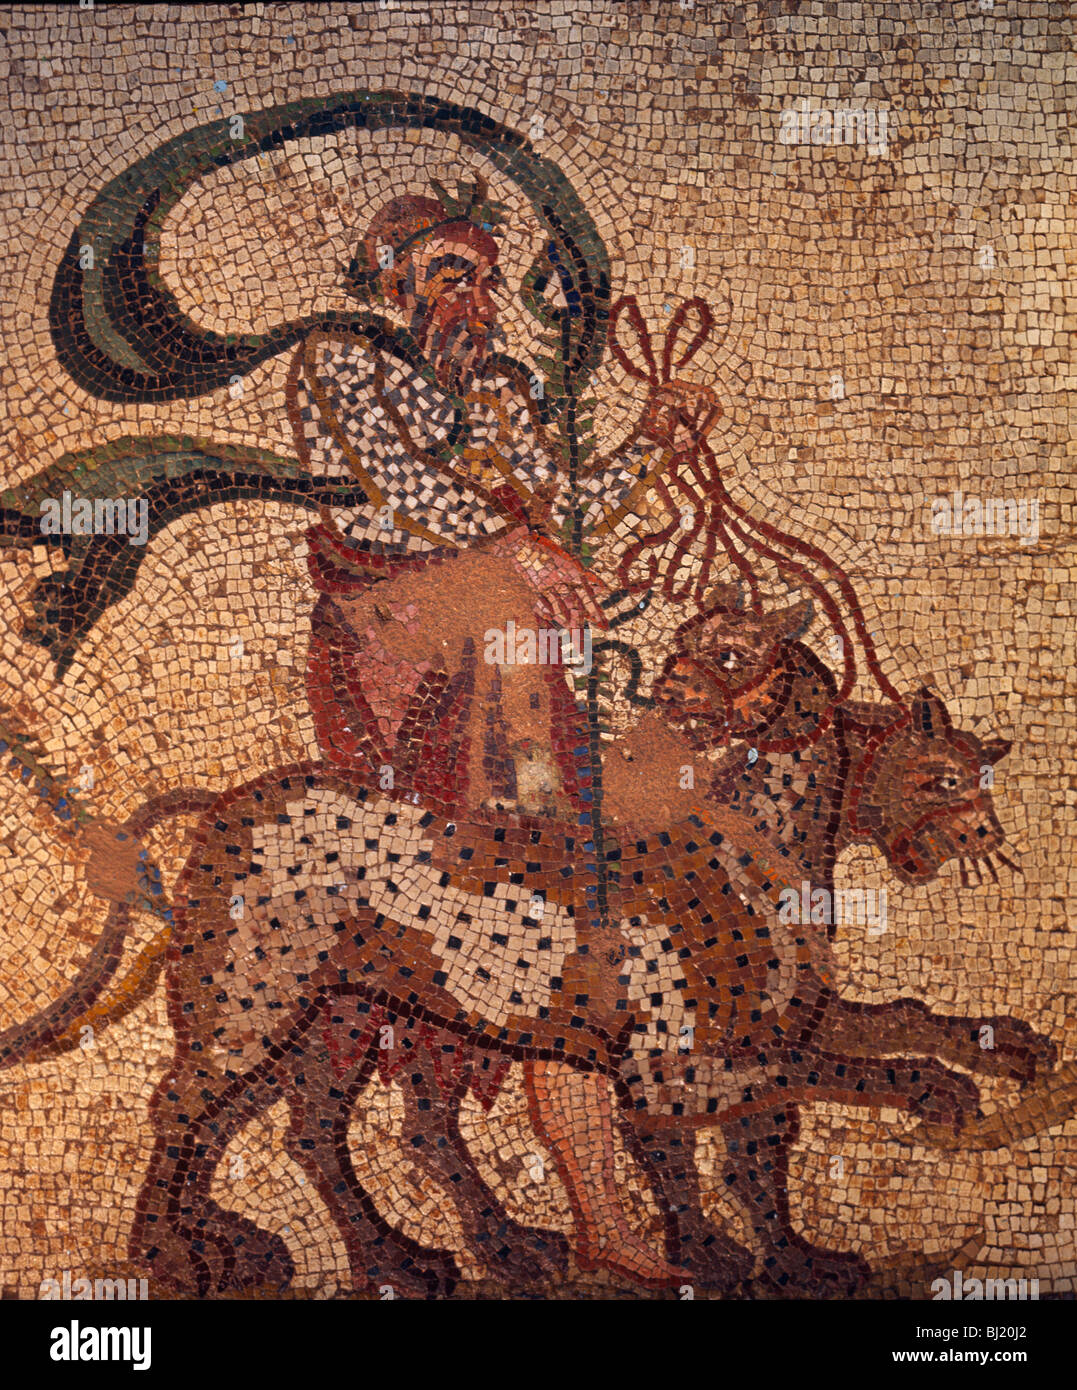 Triumph of Dionysus, Silenos with leopards pulling chariot, Roman mosaic, 3rd century, from floor of Roman villa, Paphos, Cyprus Stock Photo